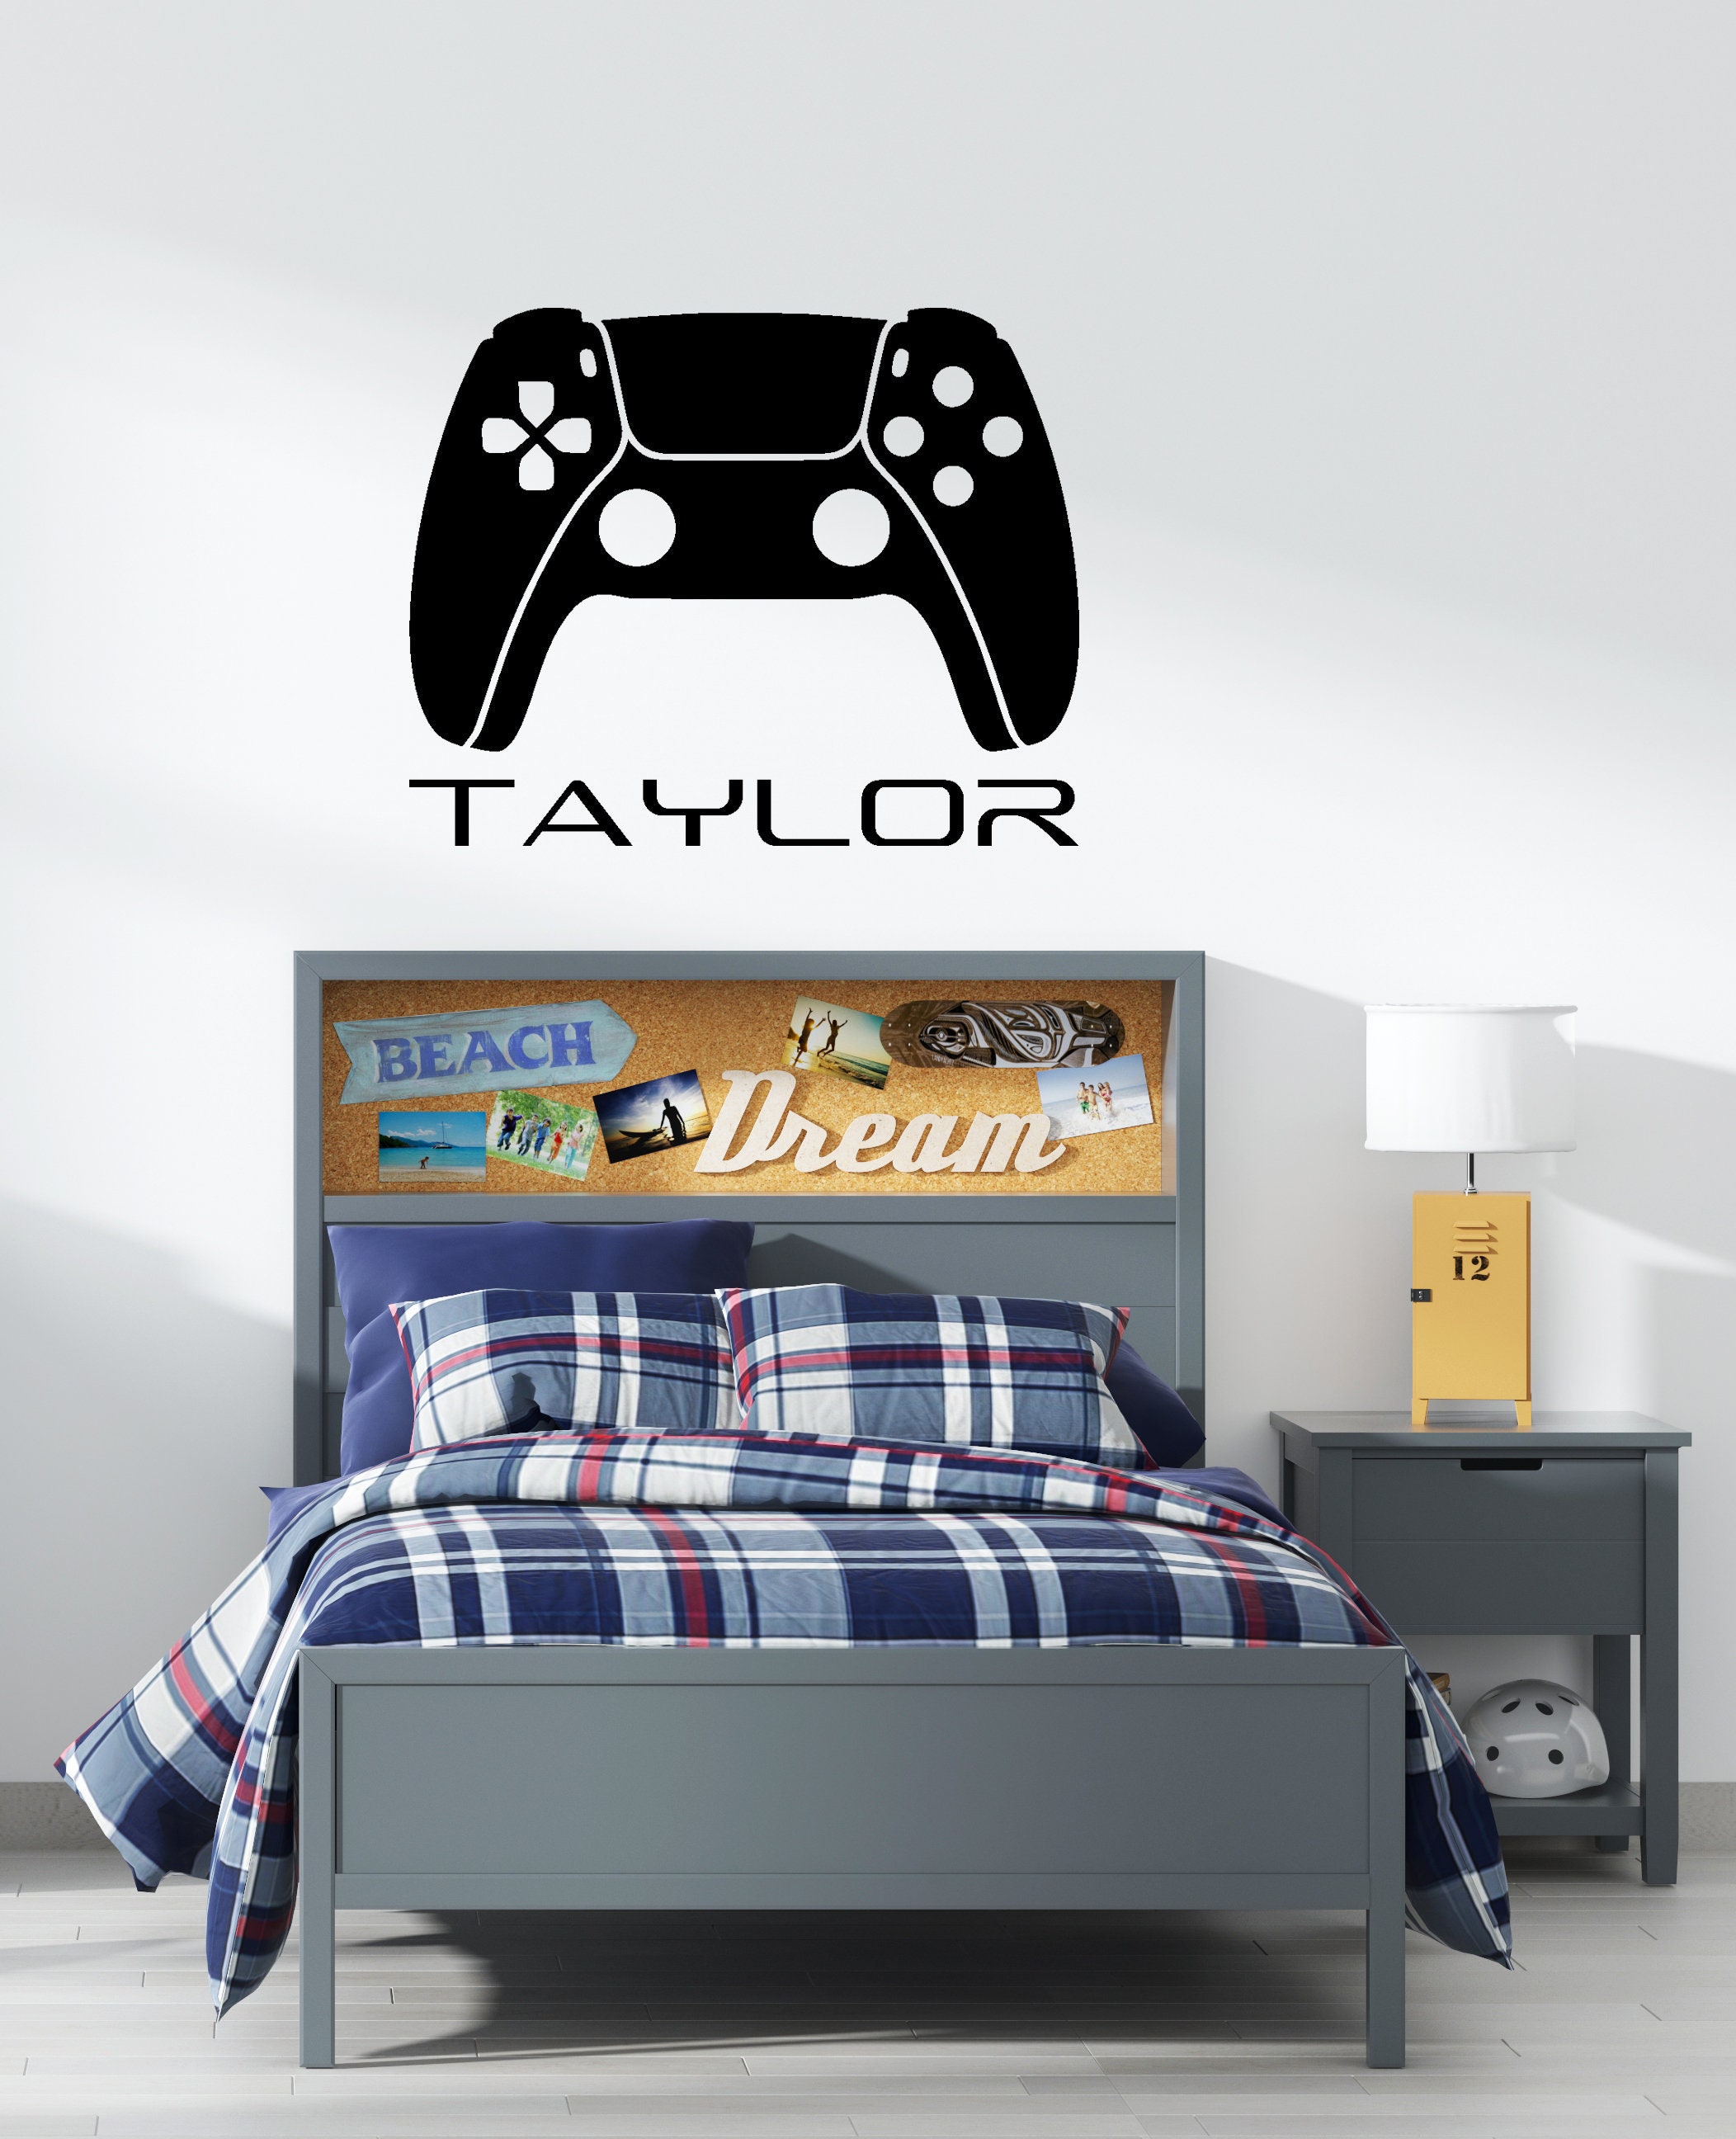 Gamer Pattern Controllers Wall Decal Quote Home Room Decor Art